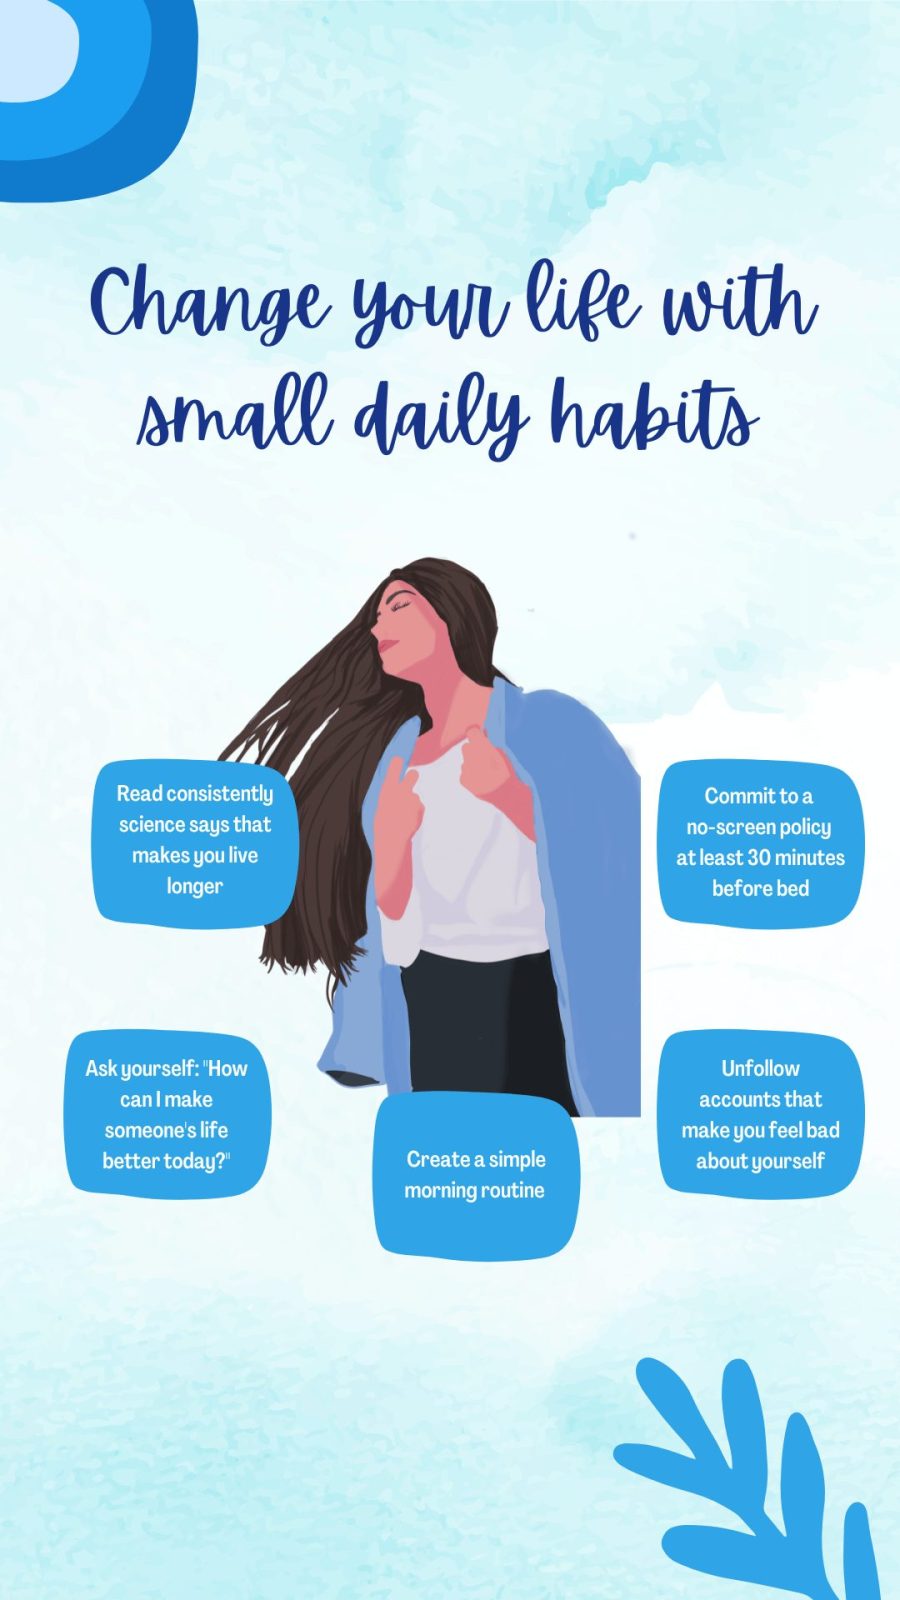 25 Small Daily Habits that Will Change Your Life in a Big Way